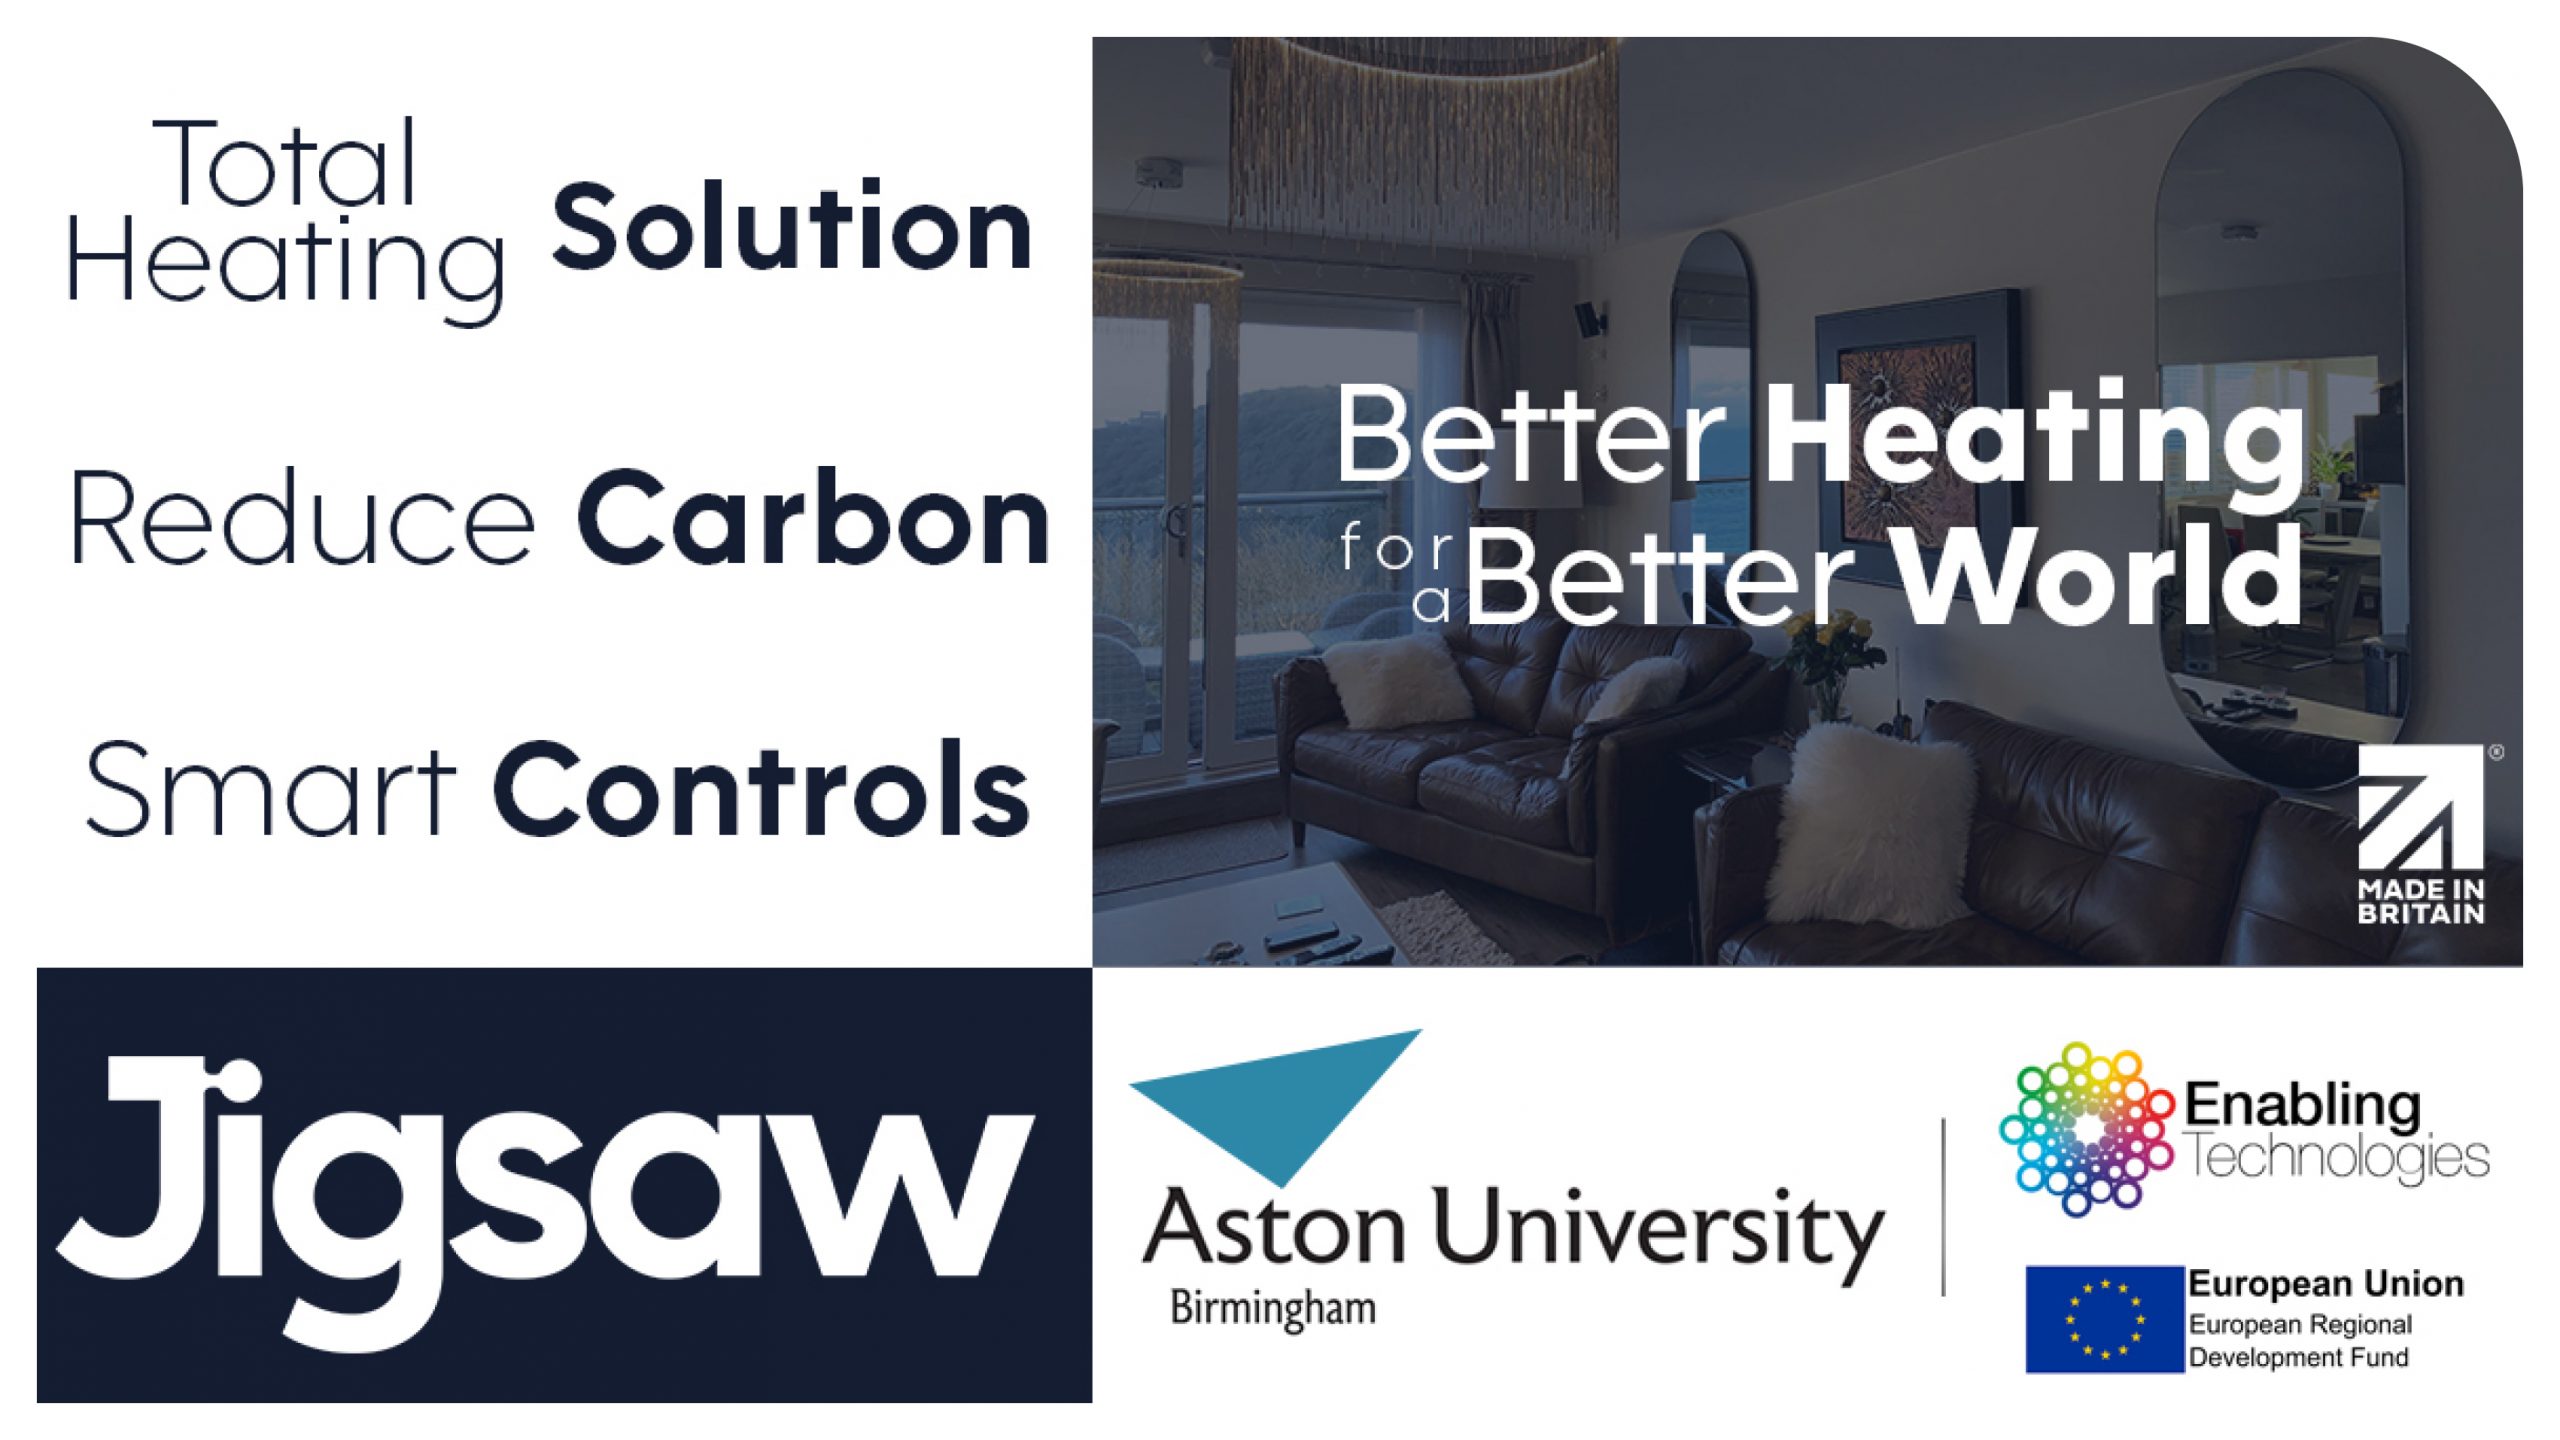 Aston University better heating study comparison with multiple heating systems